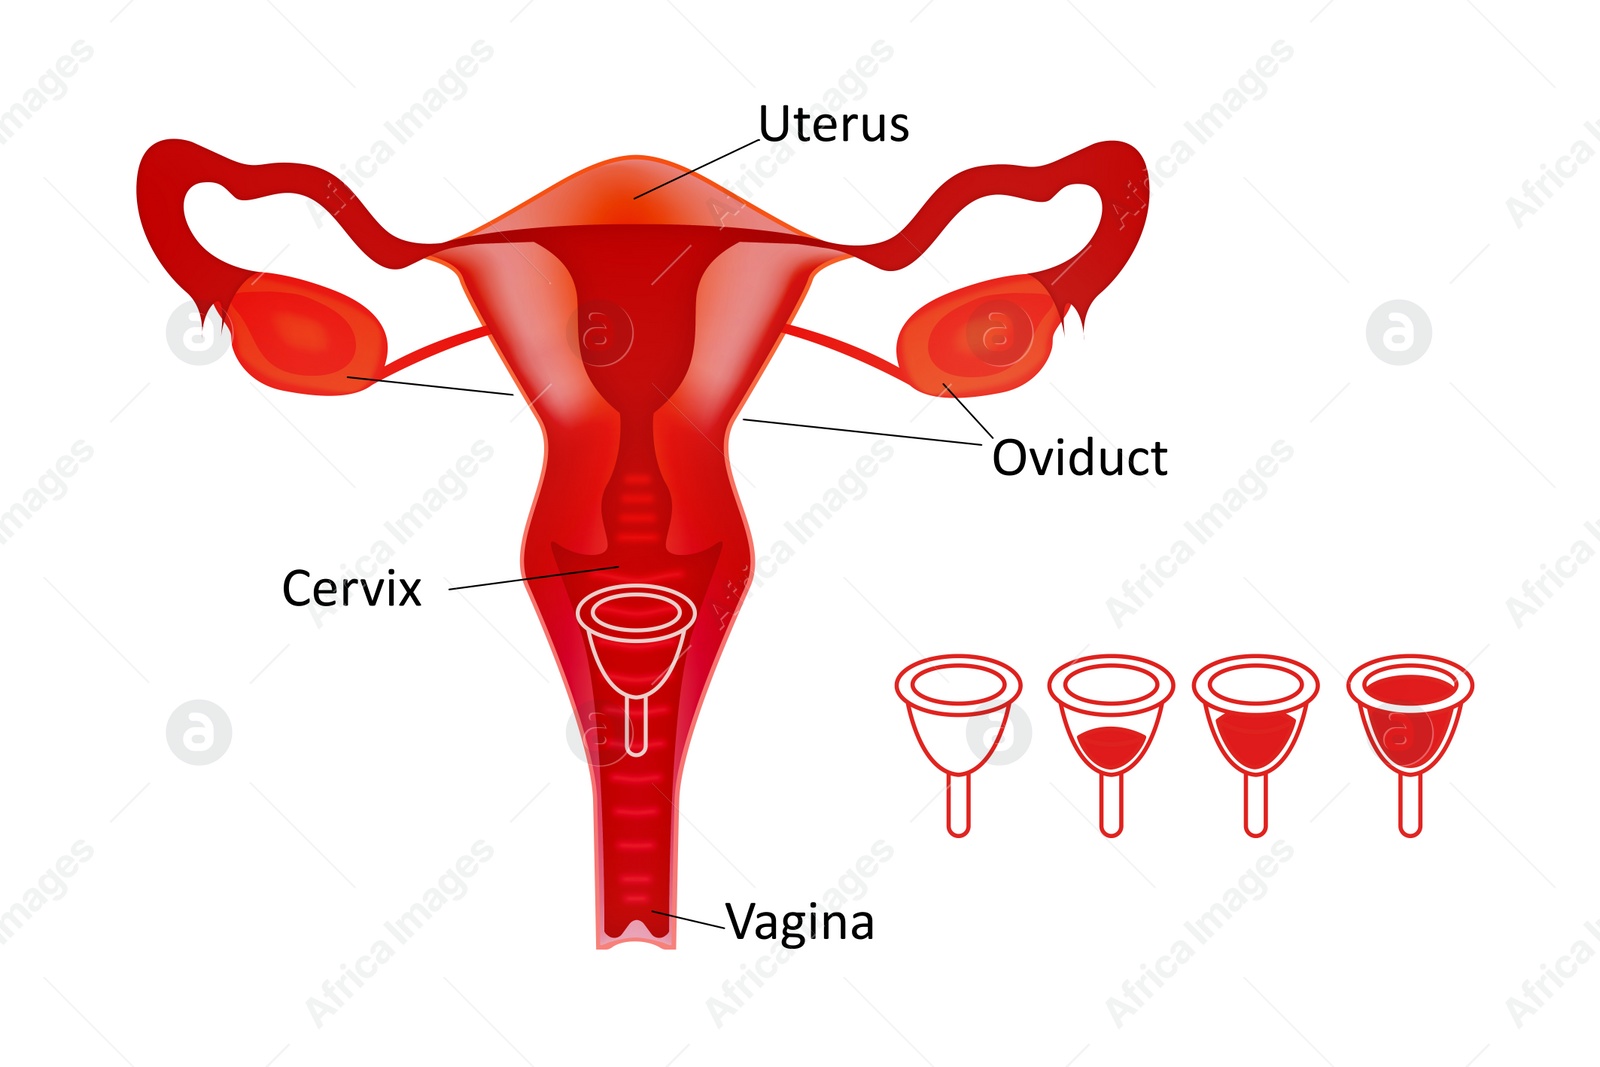 Illustration of Instruction how to use menstrual cup during period. Female reproductive system on white background, illustration